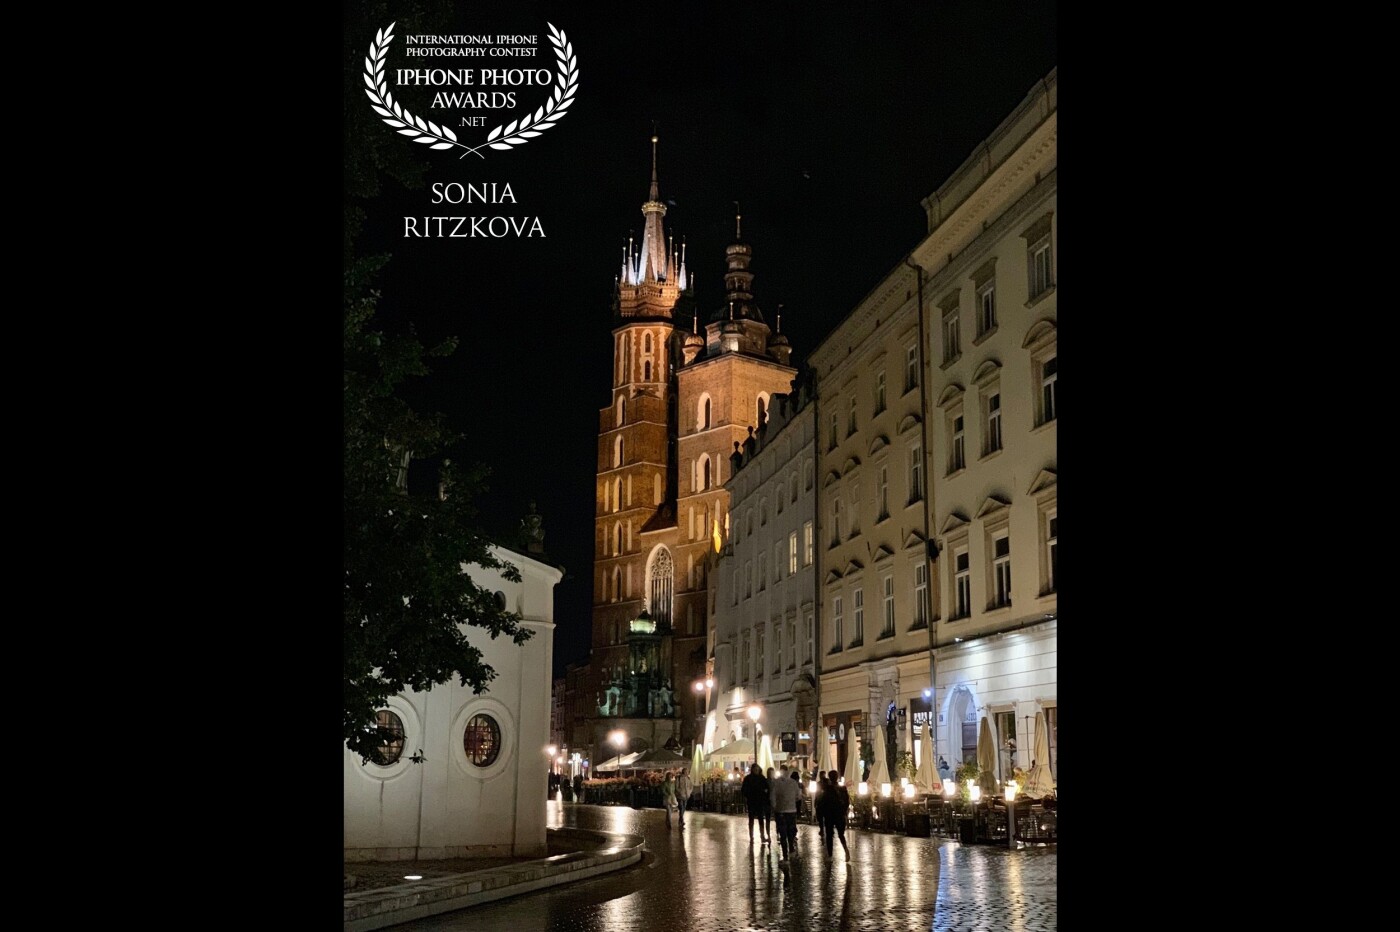 Krakow (Poland) at night after the rain is really magical. Both historic and modern city enchants many visitors including me :)